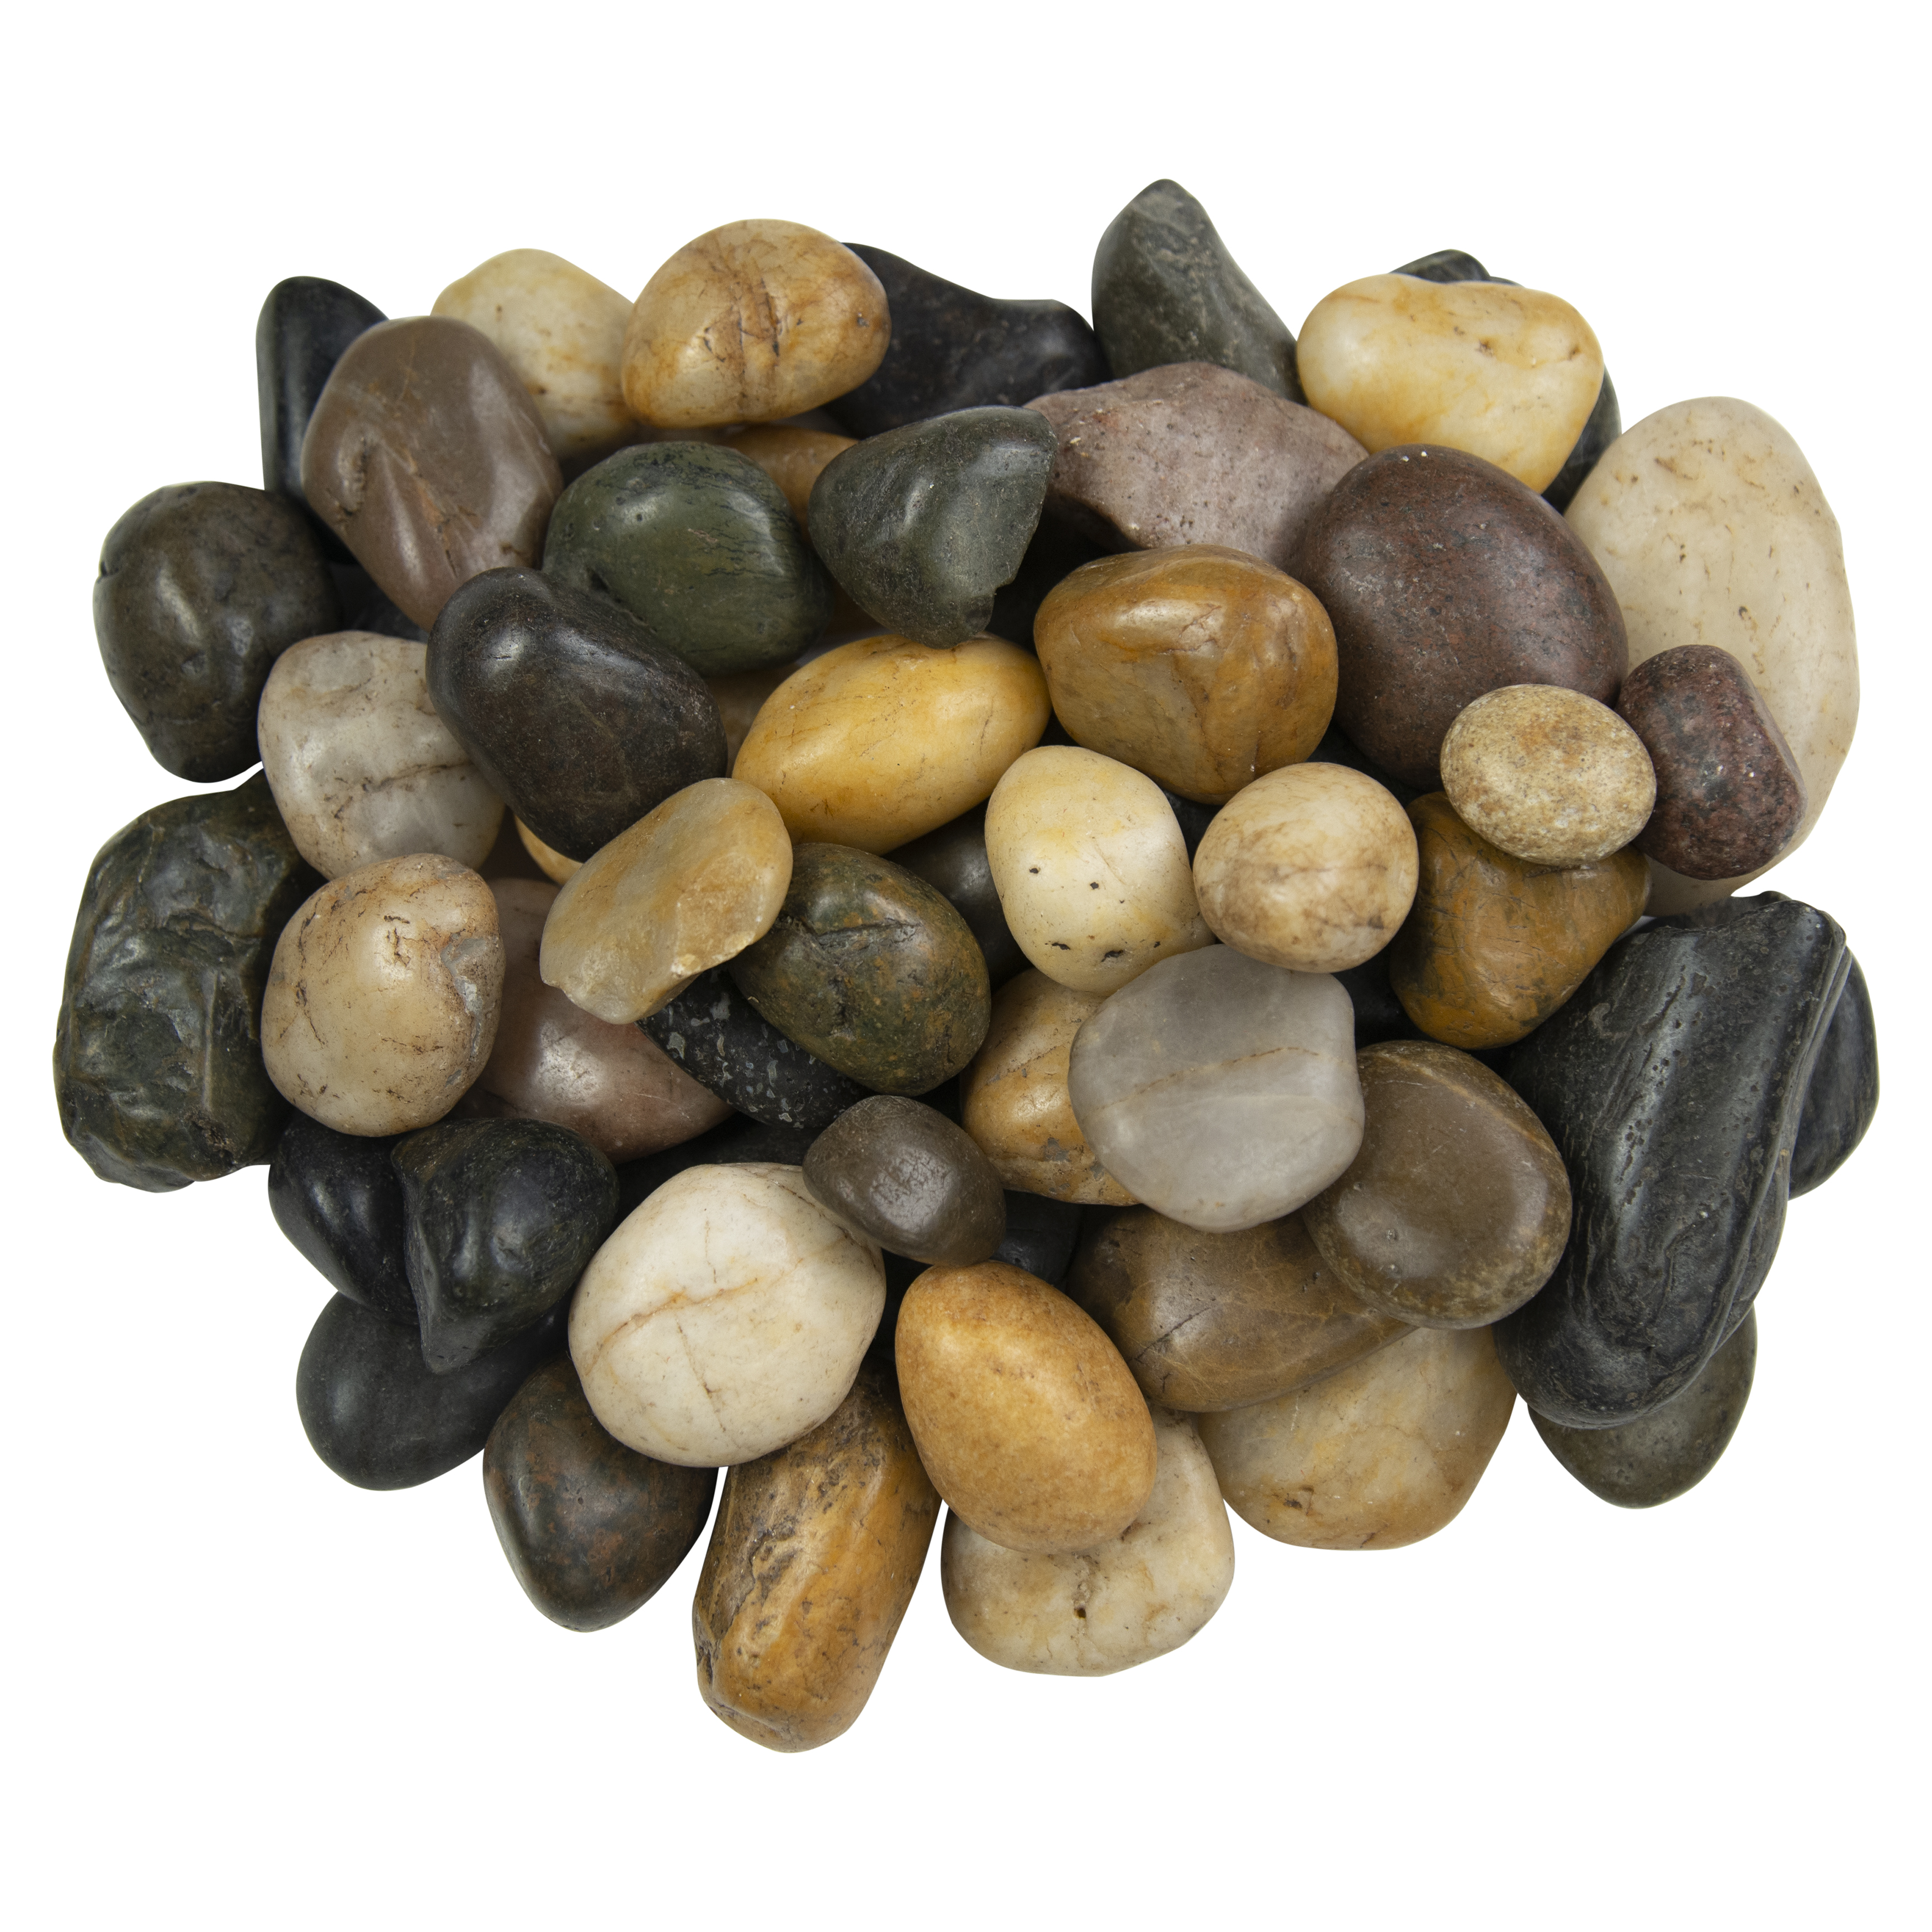 MSI 40 lb. Marble Decorative Stones, Grade-1, First-Quality Polished Marble Pebbles Multicolor - image 1 of 5